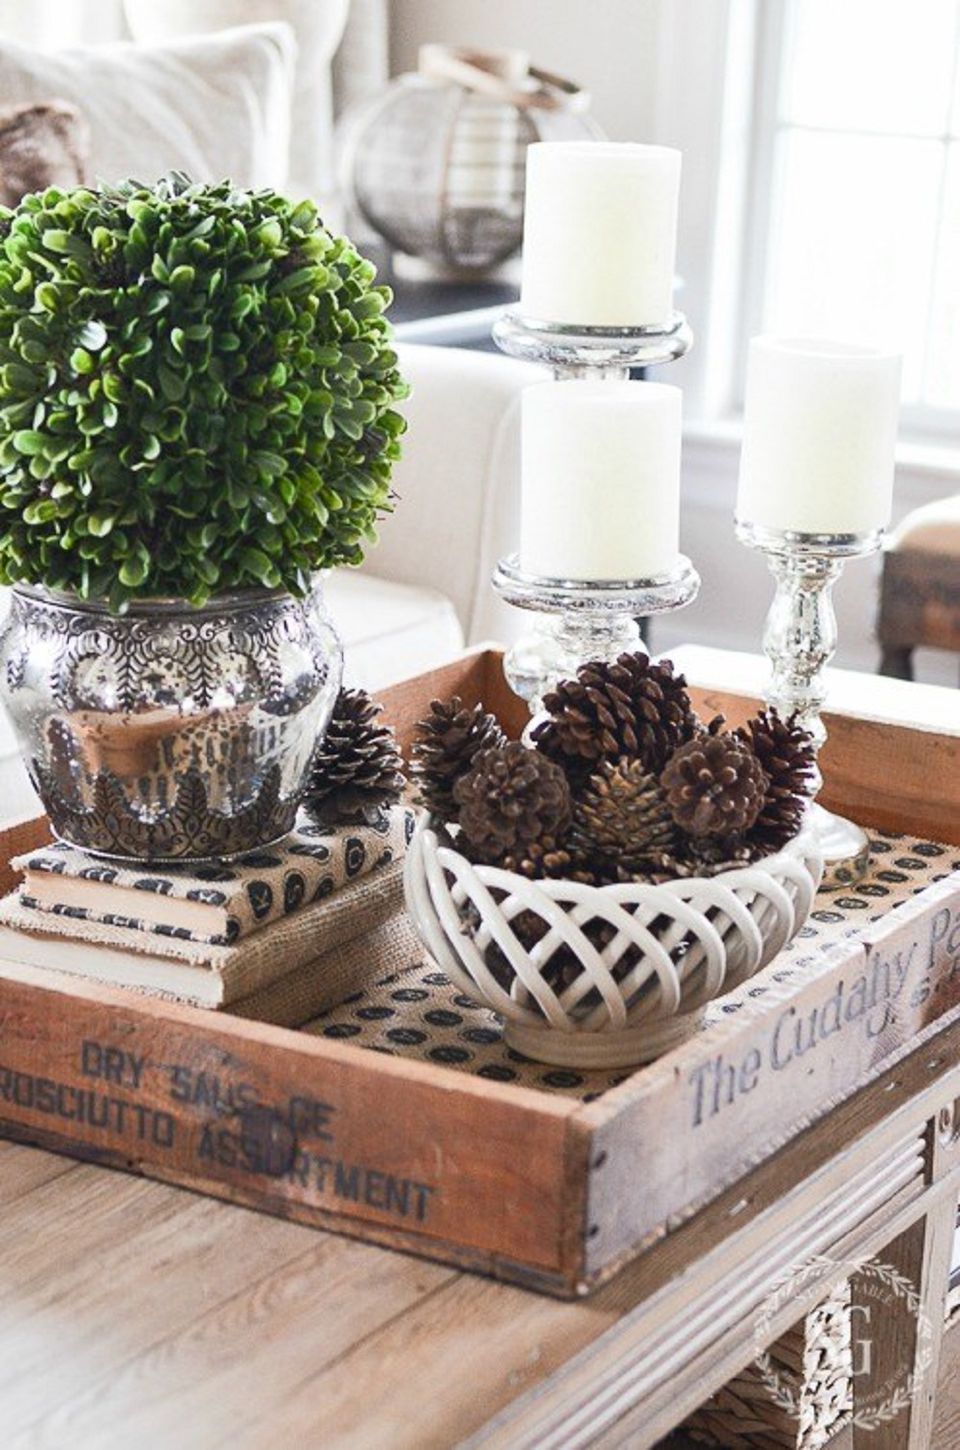 15 Ways to Decorate Your Home for Winter